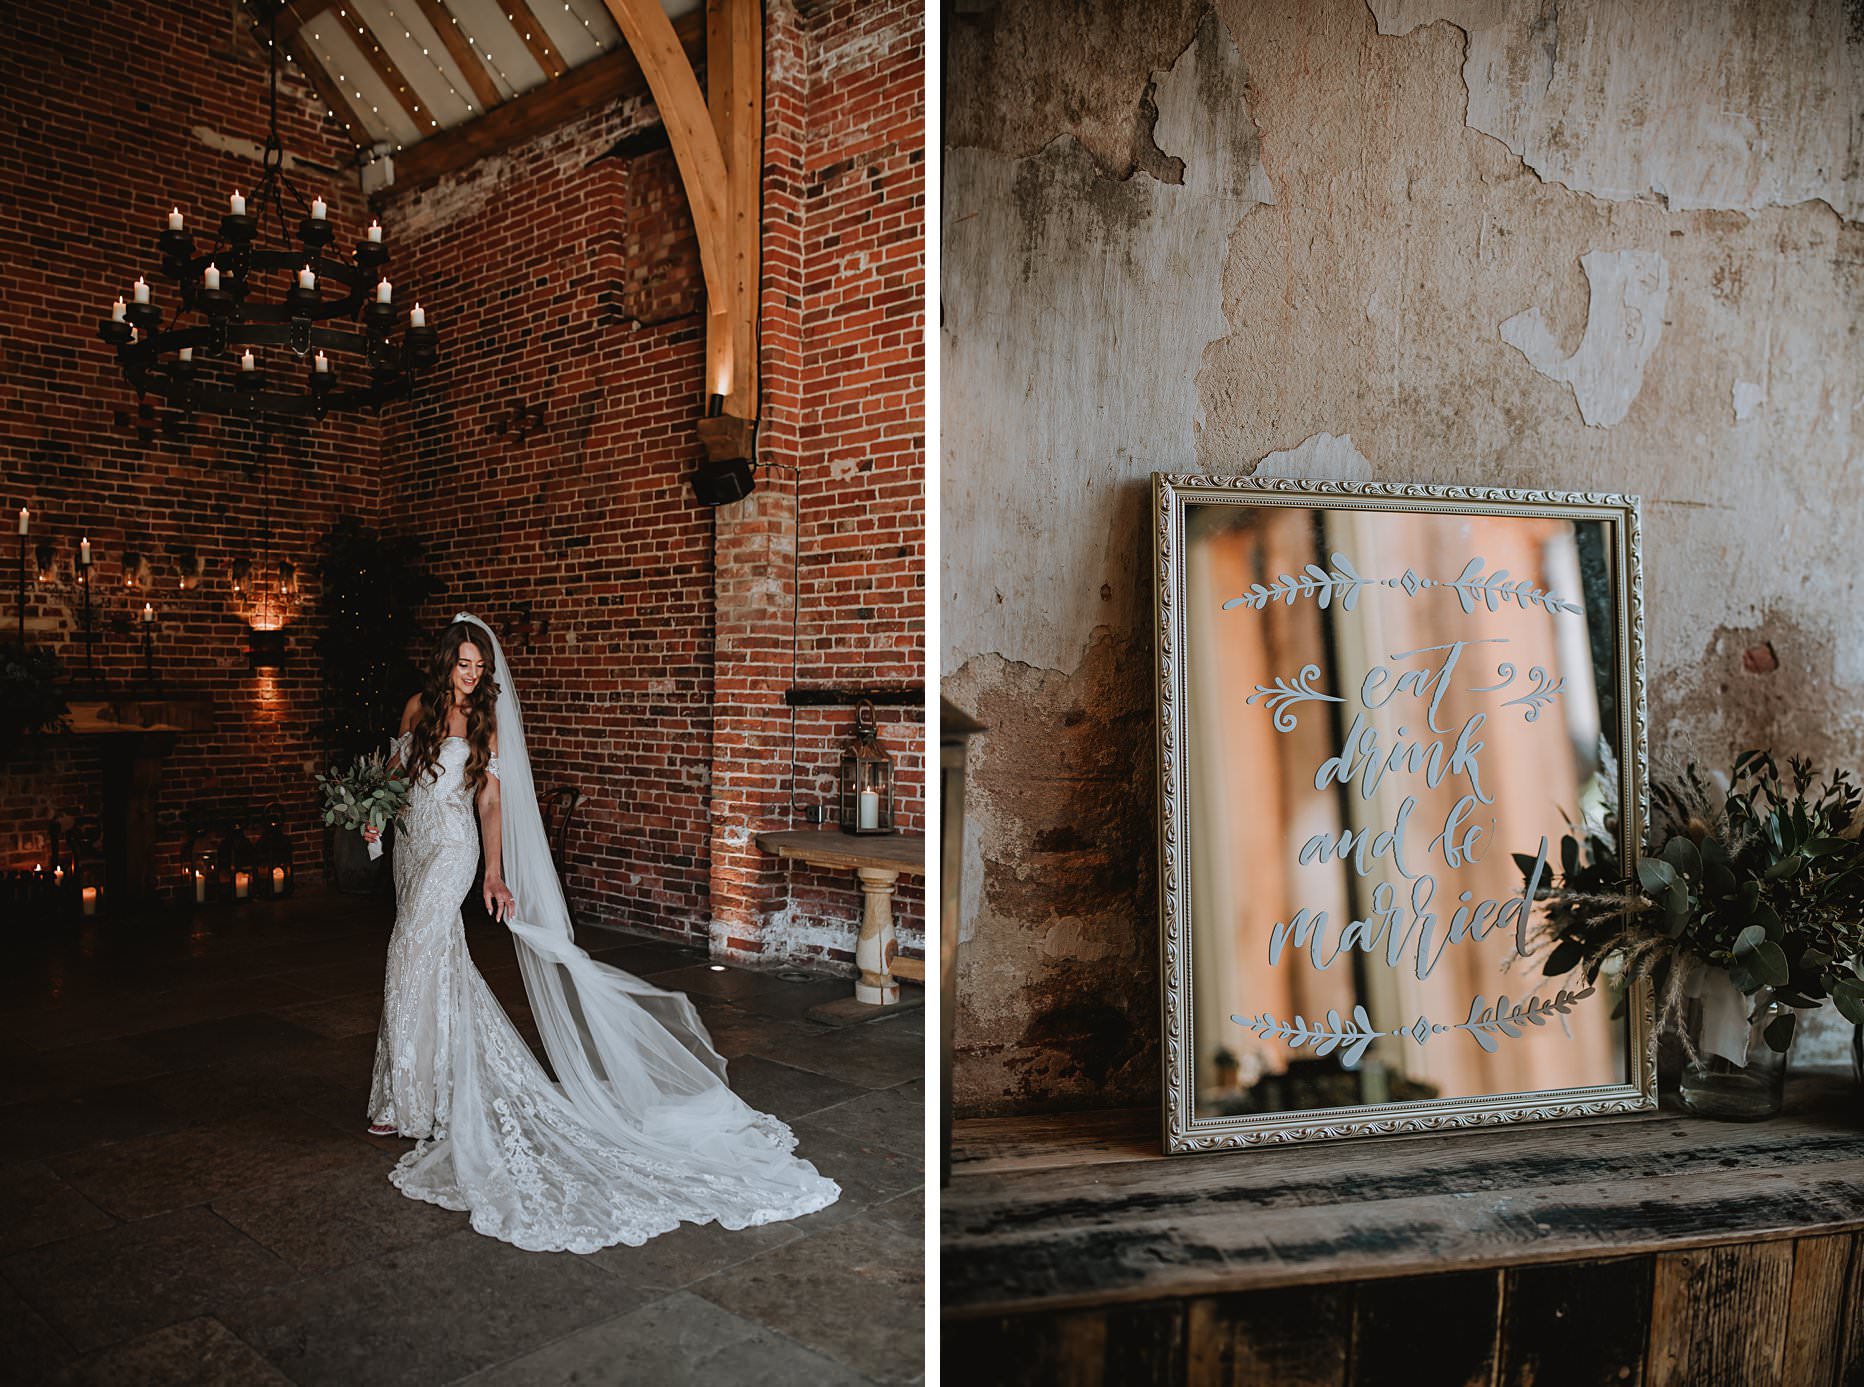 First image is of a bride inside the ceremony room at Hazel Gap Barn. She is fanning out her wedding dress and veil whilst holding a bouquet of green foliage. Second image is of a mirror which has writing on that reads "eat, drink and be married" in swirly writing. 